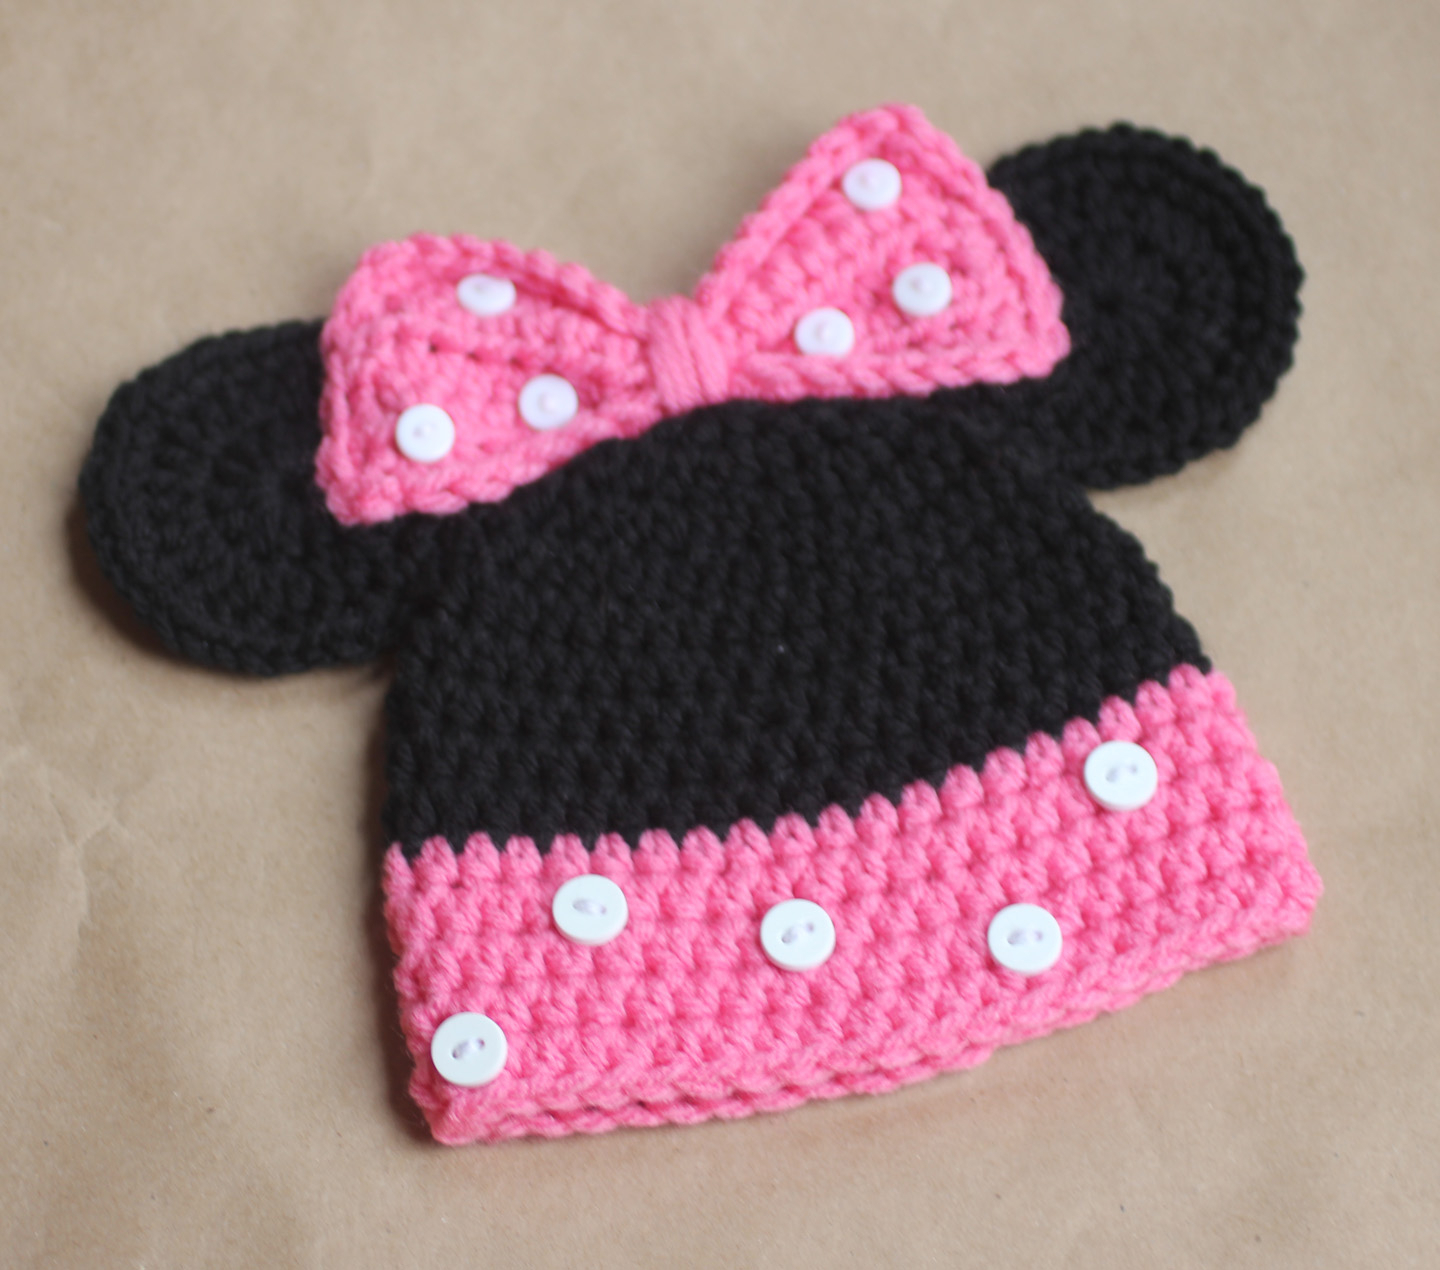 Knitting Pattern For Mickey Mouse Hat Crochet Hat Pattern For 1 Year Old Mickey And Minnie Mouse Crochet